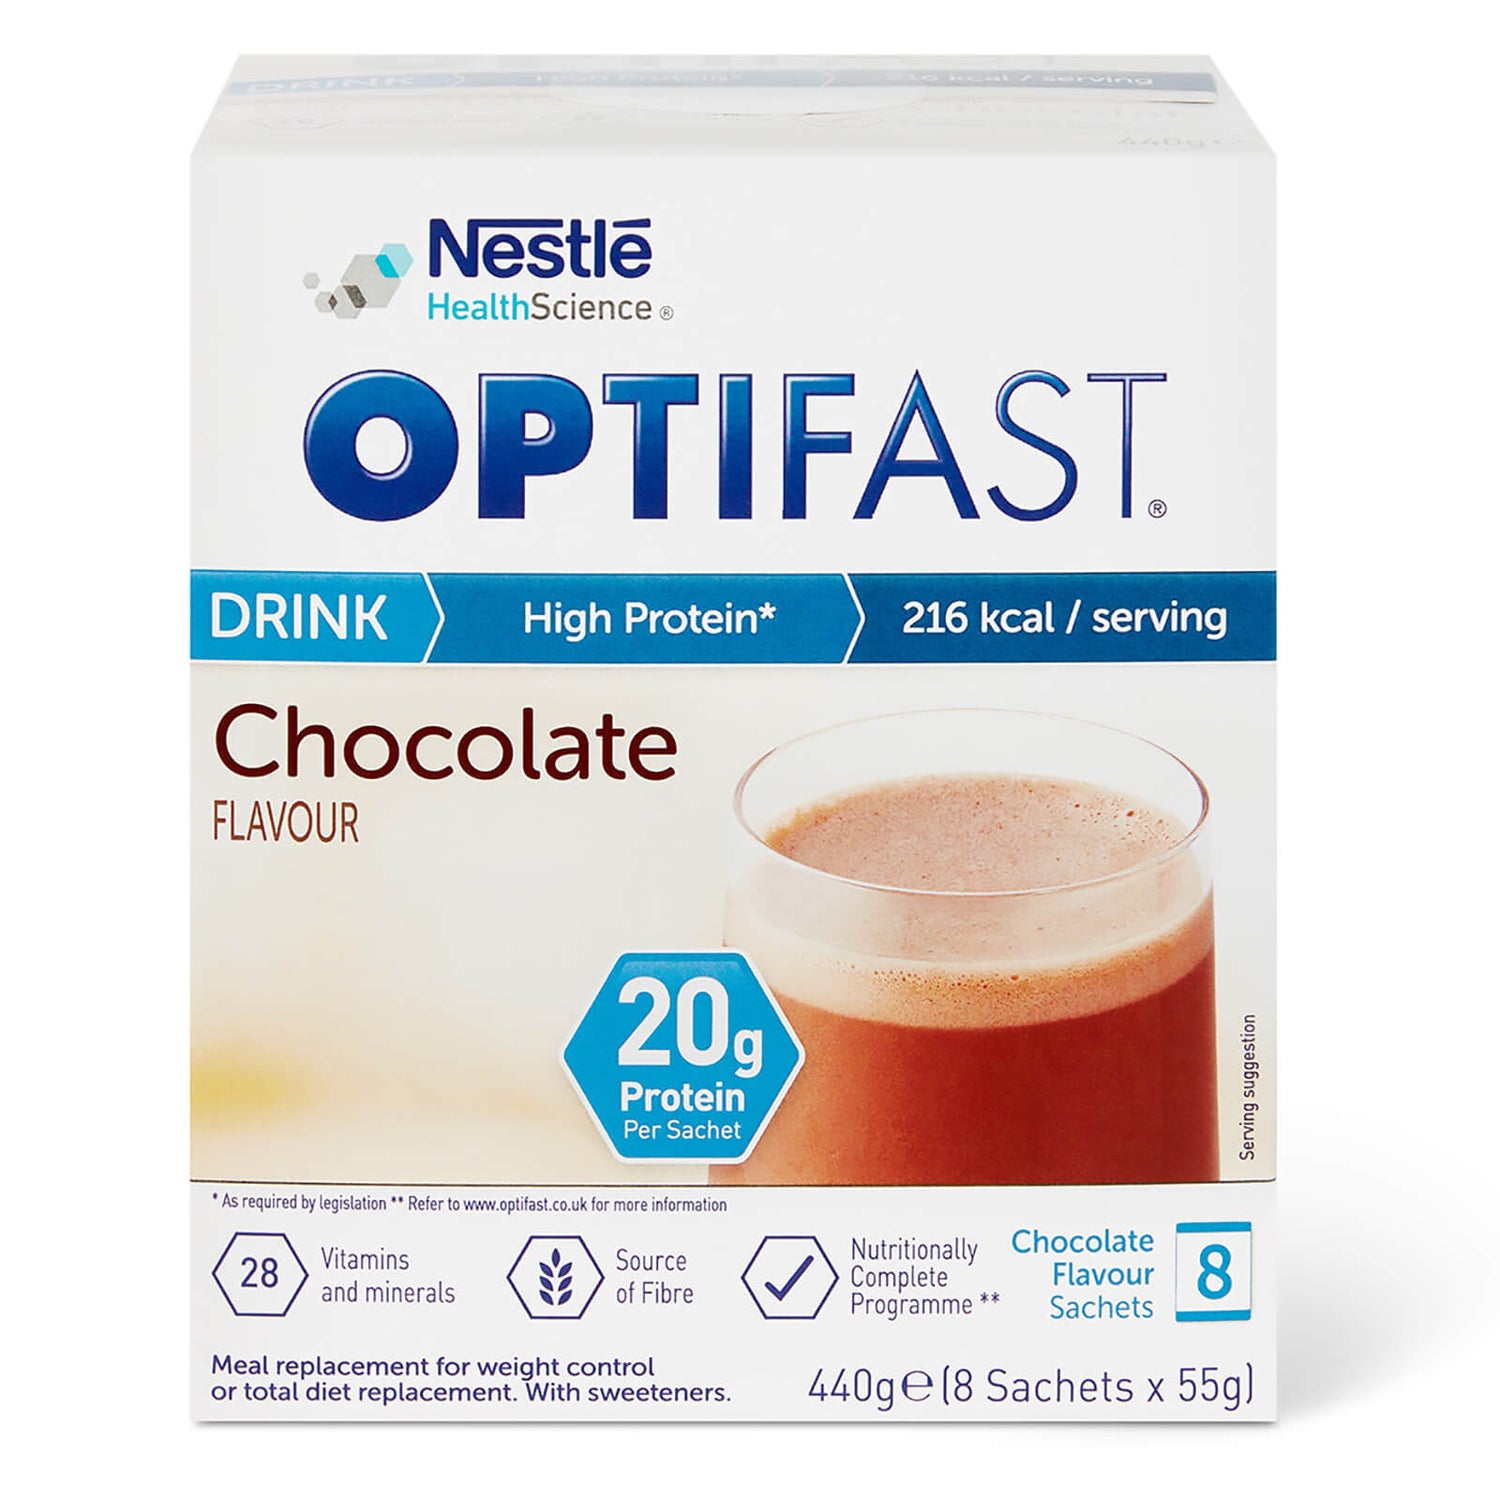 OPTIFAST Shakes - Chocolate - 1 Month Supply (32 Sachets)